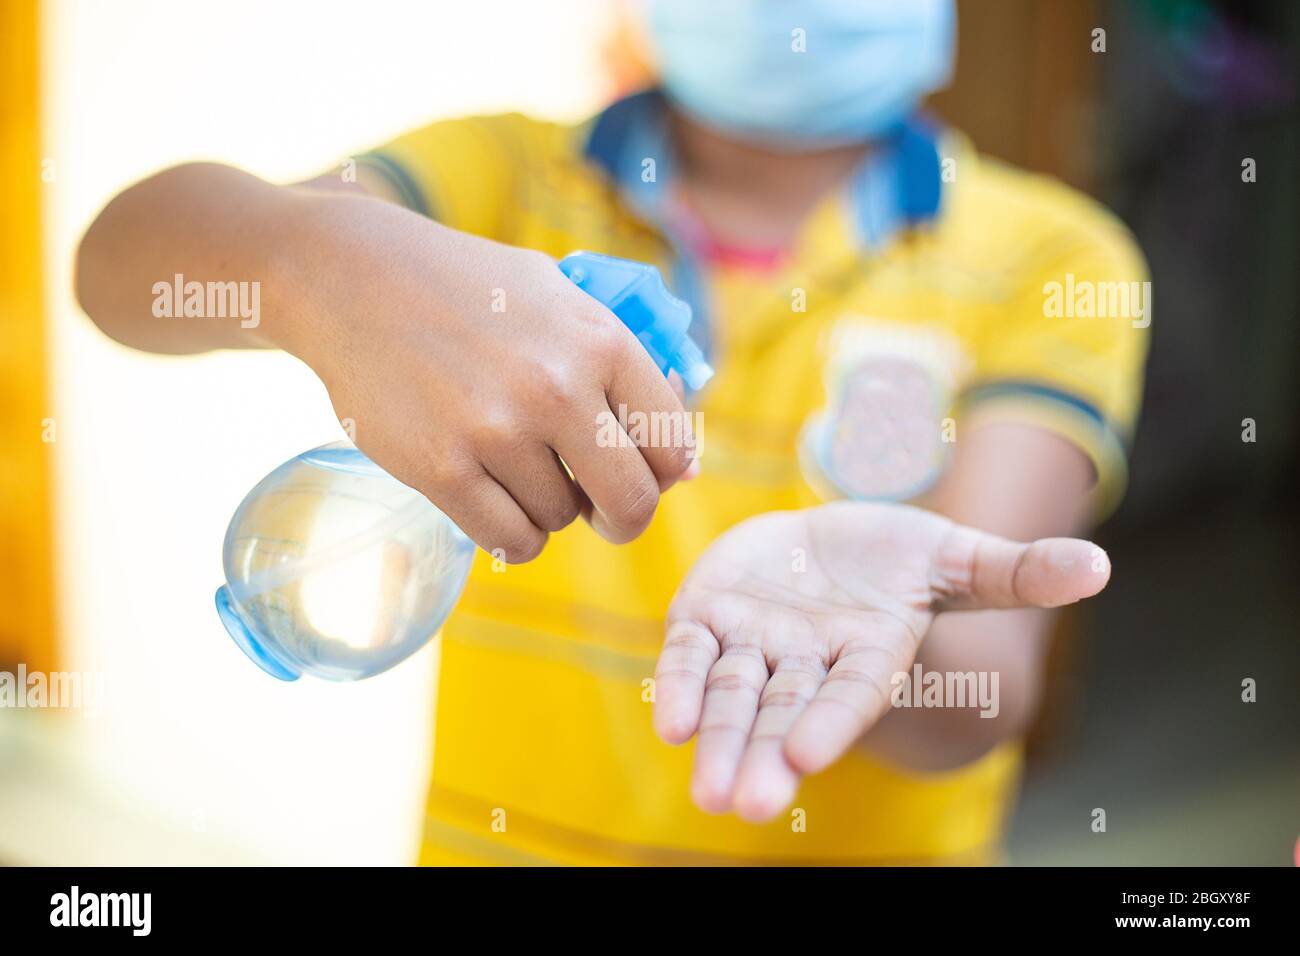 Asian people using alcohol antiseptic gel and wearing prevention mask,prevent against infection of Covid-19 outbreak,woman washing hands with hand san Stock Photo